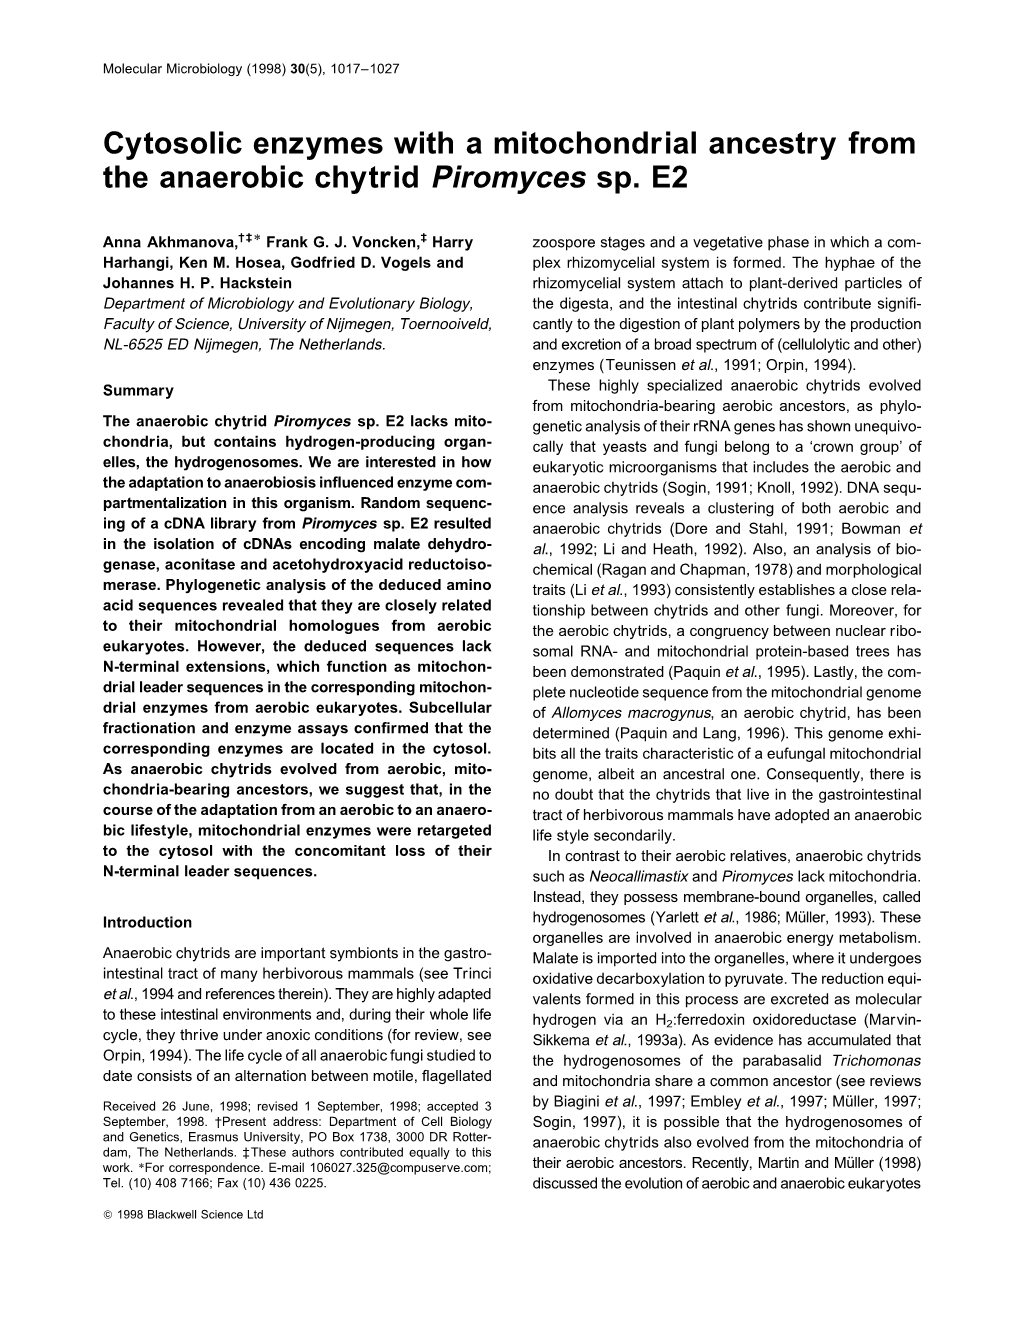 Cytosolic Enzymes with a Mitochondrial Ancestry from the Anaerobic Chytrid Piromyces Sp